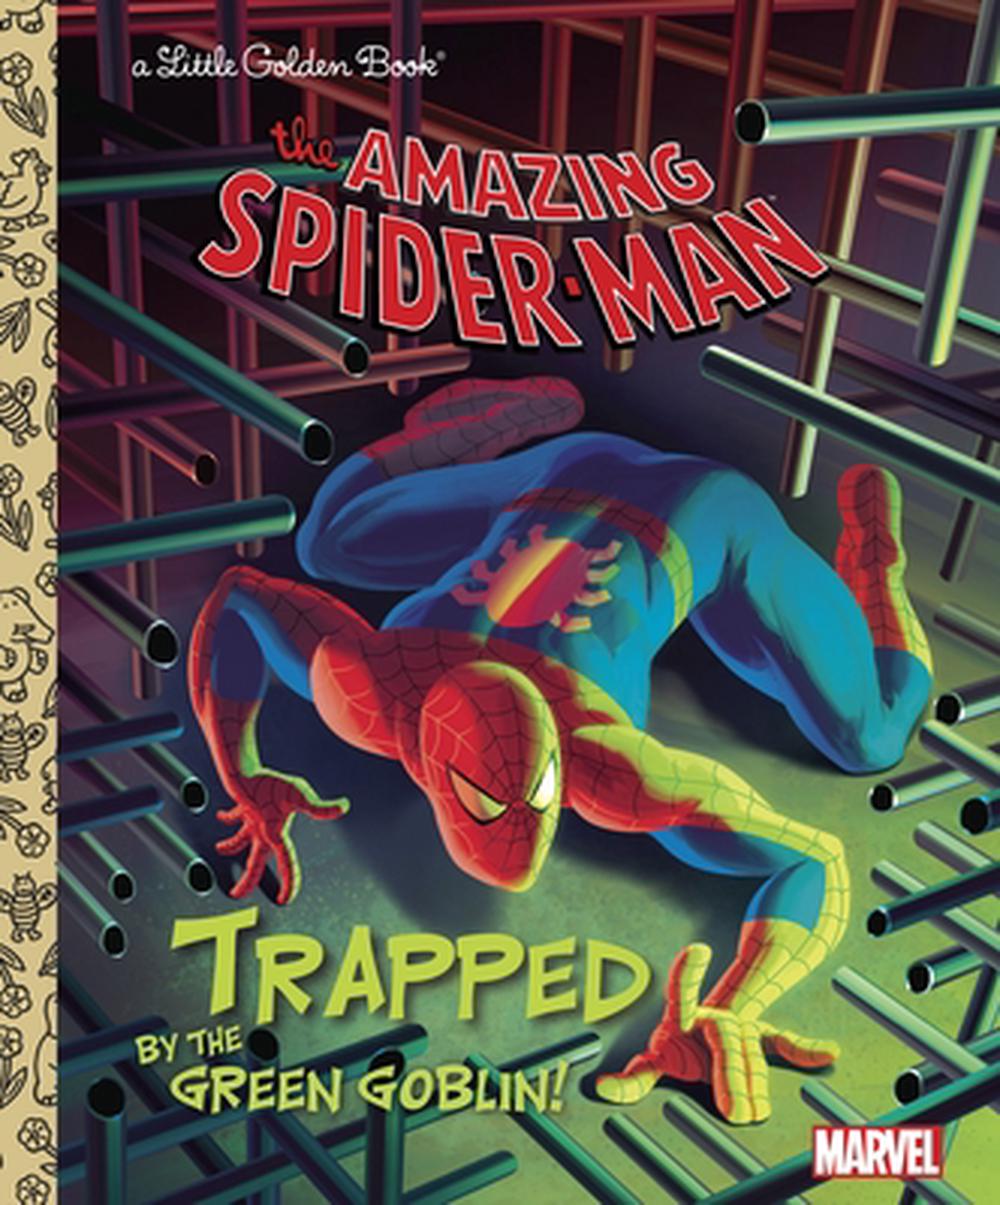 the　(Marvel:　Spider-Man)　9780307976550　by　Frank　The　Berrios,　Hardcover,　Buy　Green　at　Nile　Trapped　by　Goblin!　online